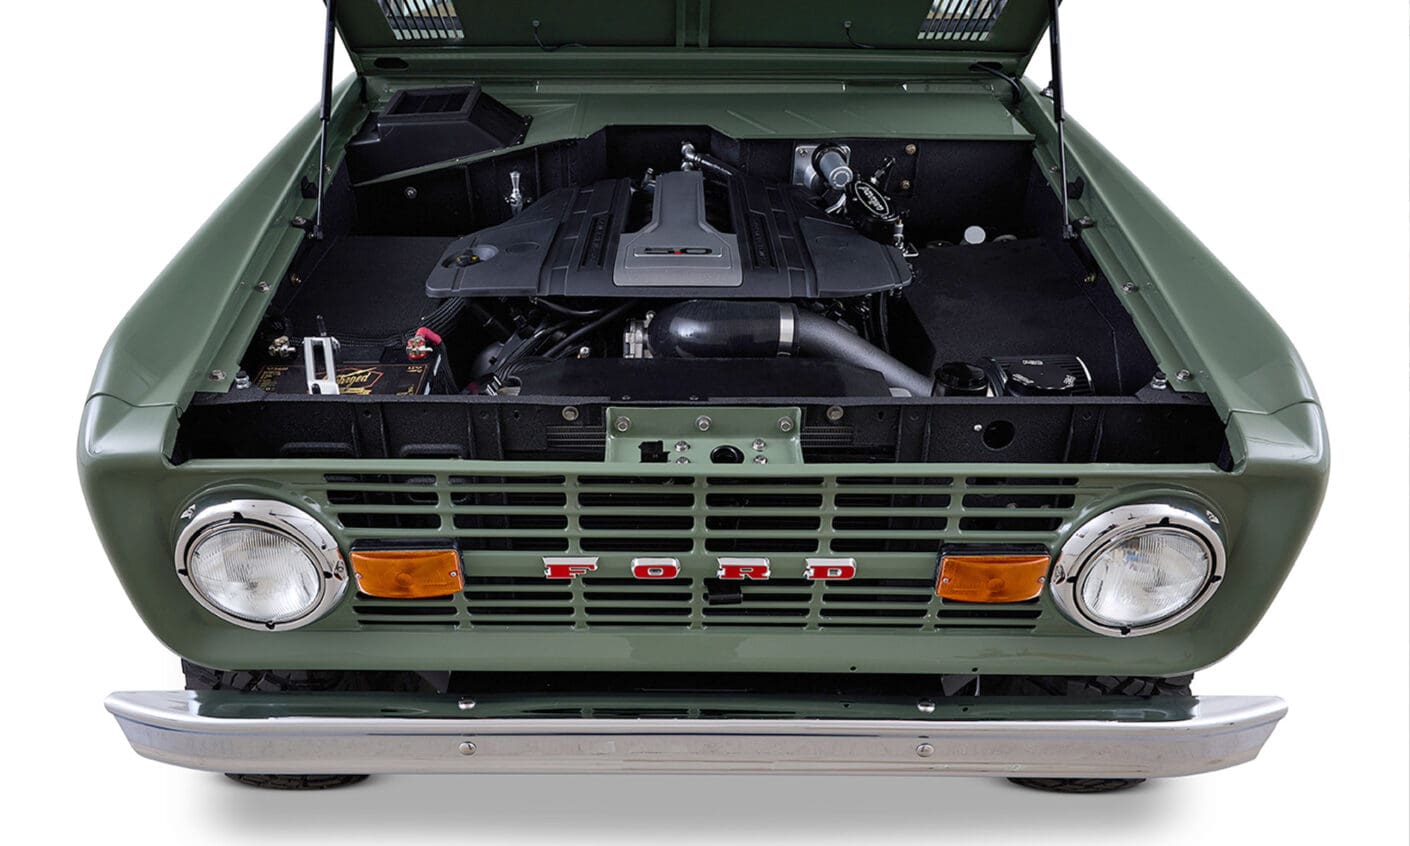 Ford Bronco 1973 Boxwood Green Coyote Series with Ball Glove Interior Engine